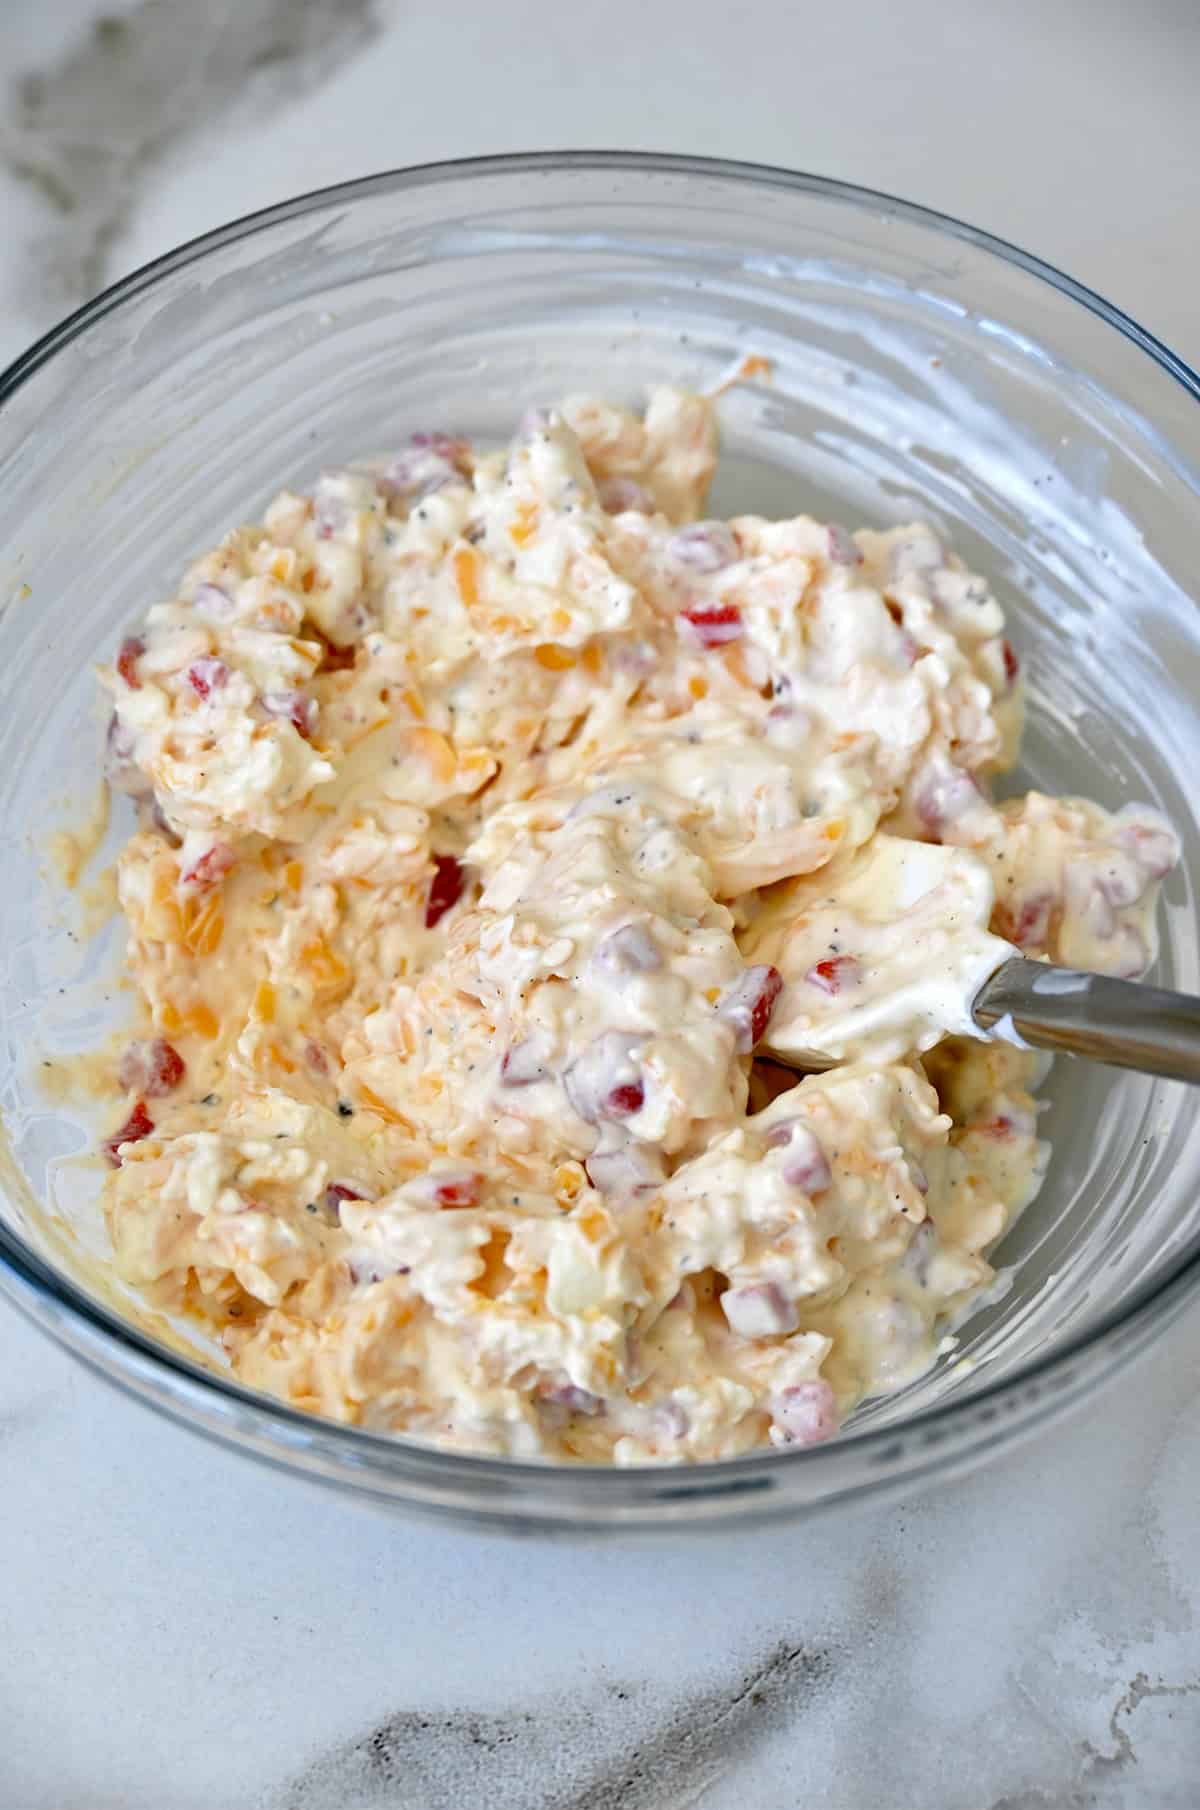 A glass bowl containing pimento cheese.